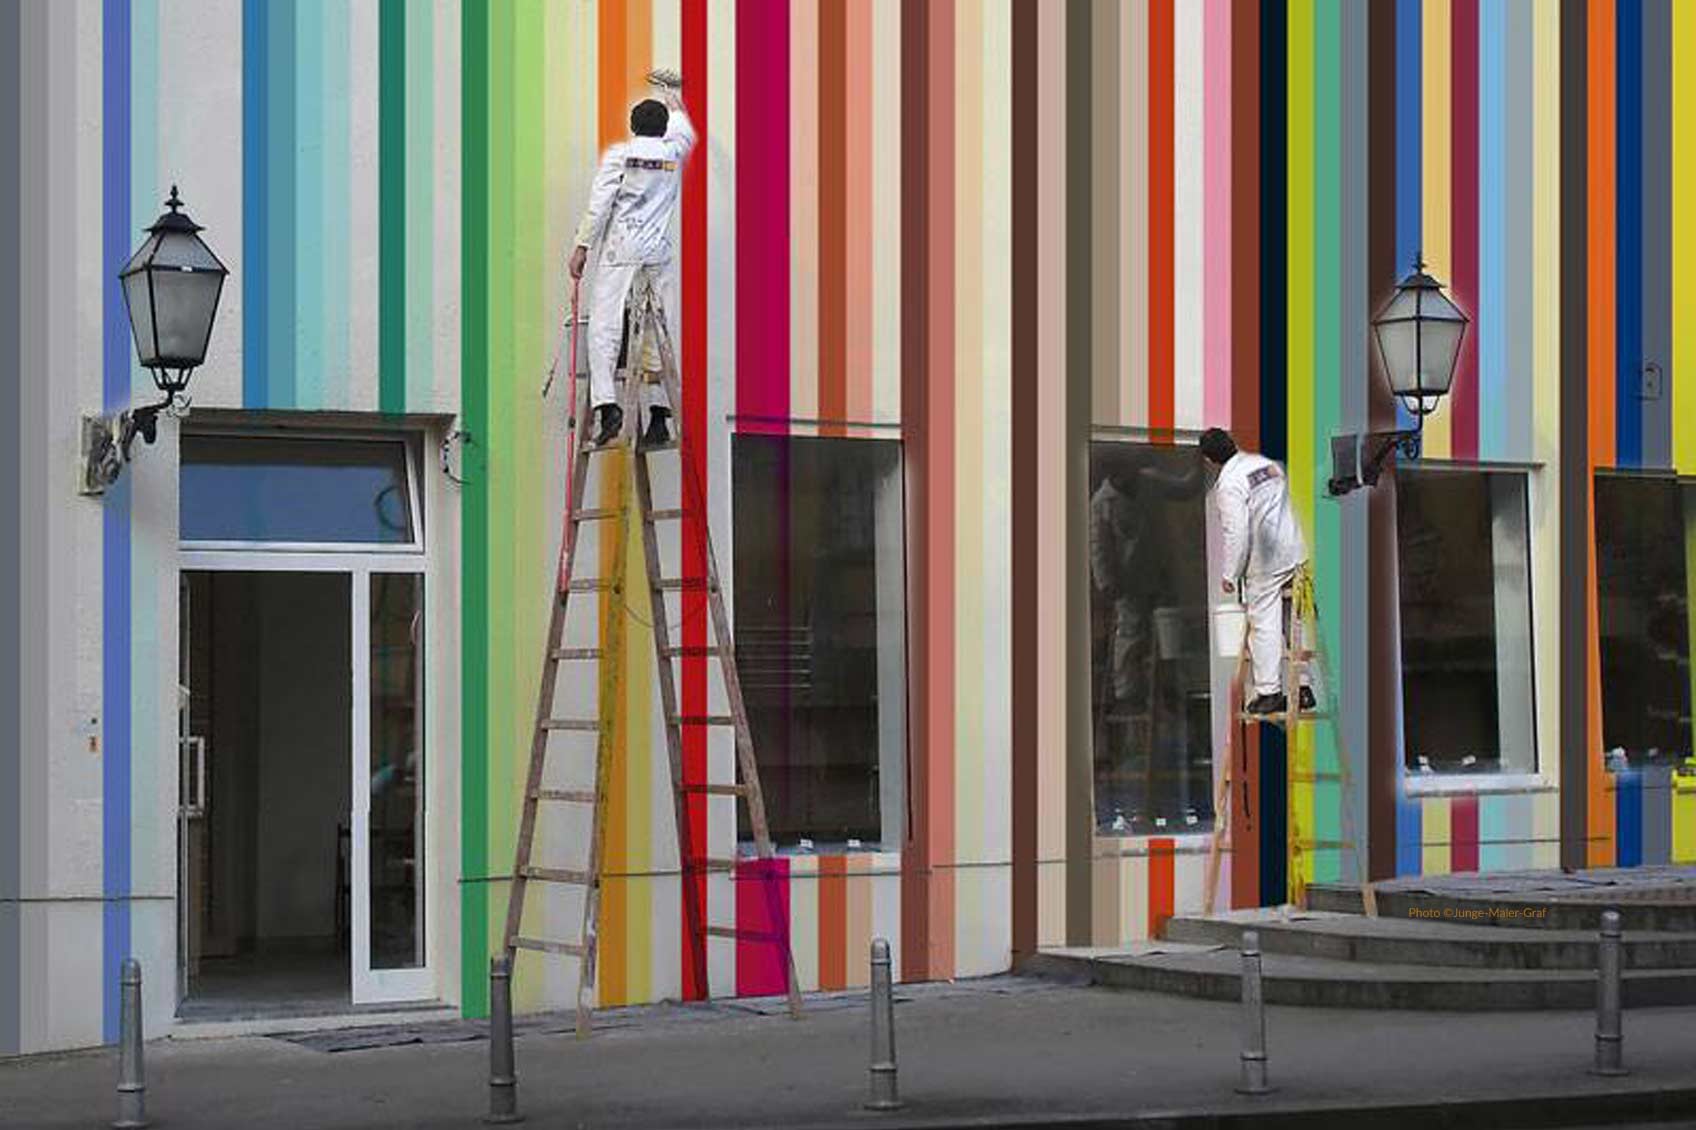 Le COrbusier paint on facade all colors of polychromy